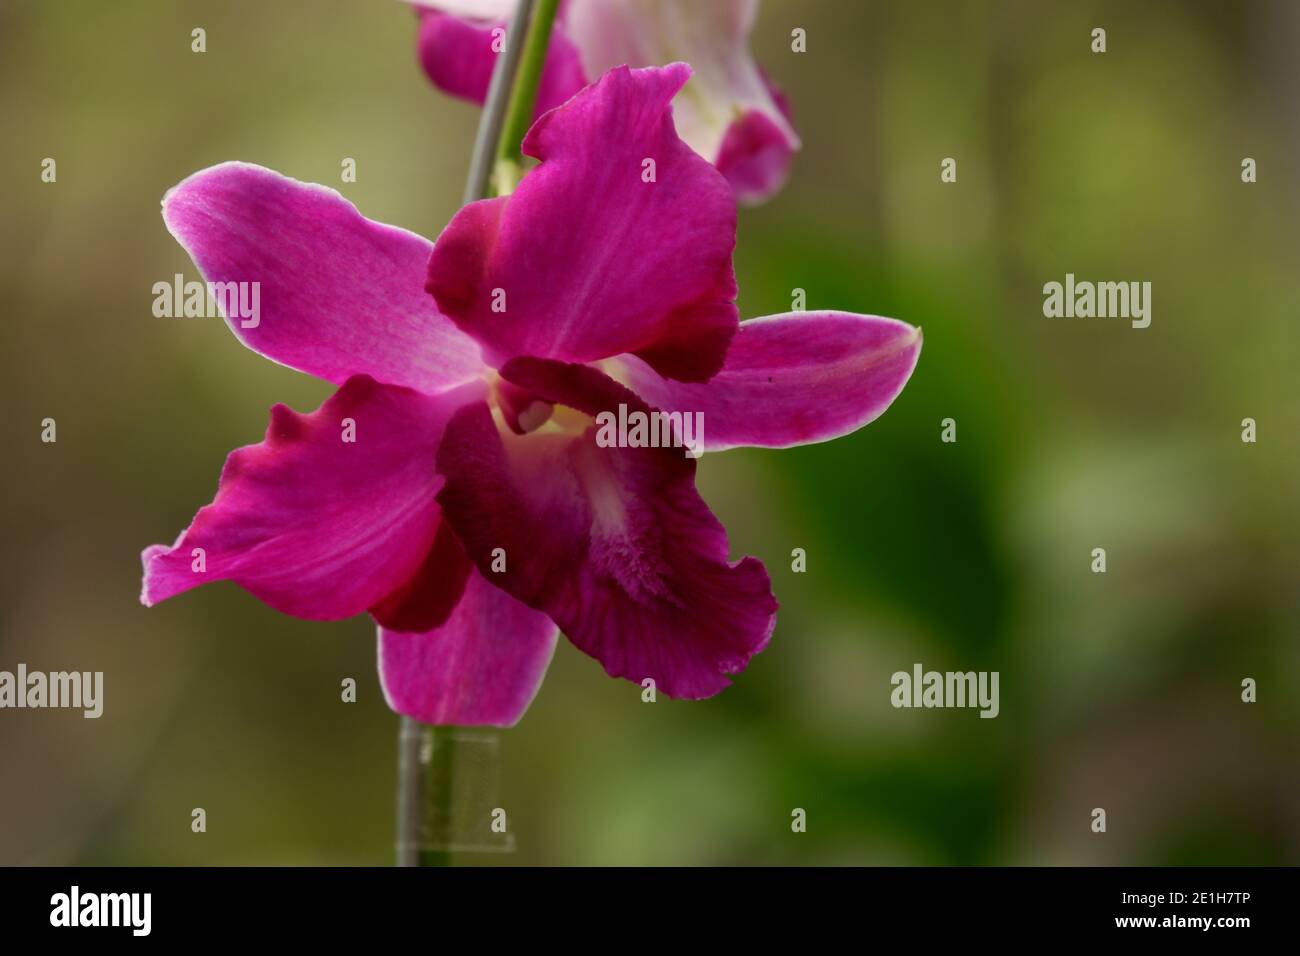 close up image of beautiful purple dendrobium orchid flowers isolated on blur background Stock Photo